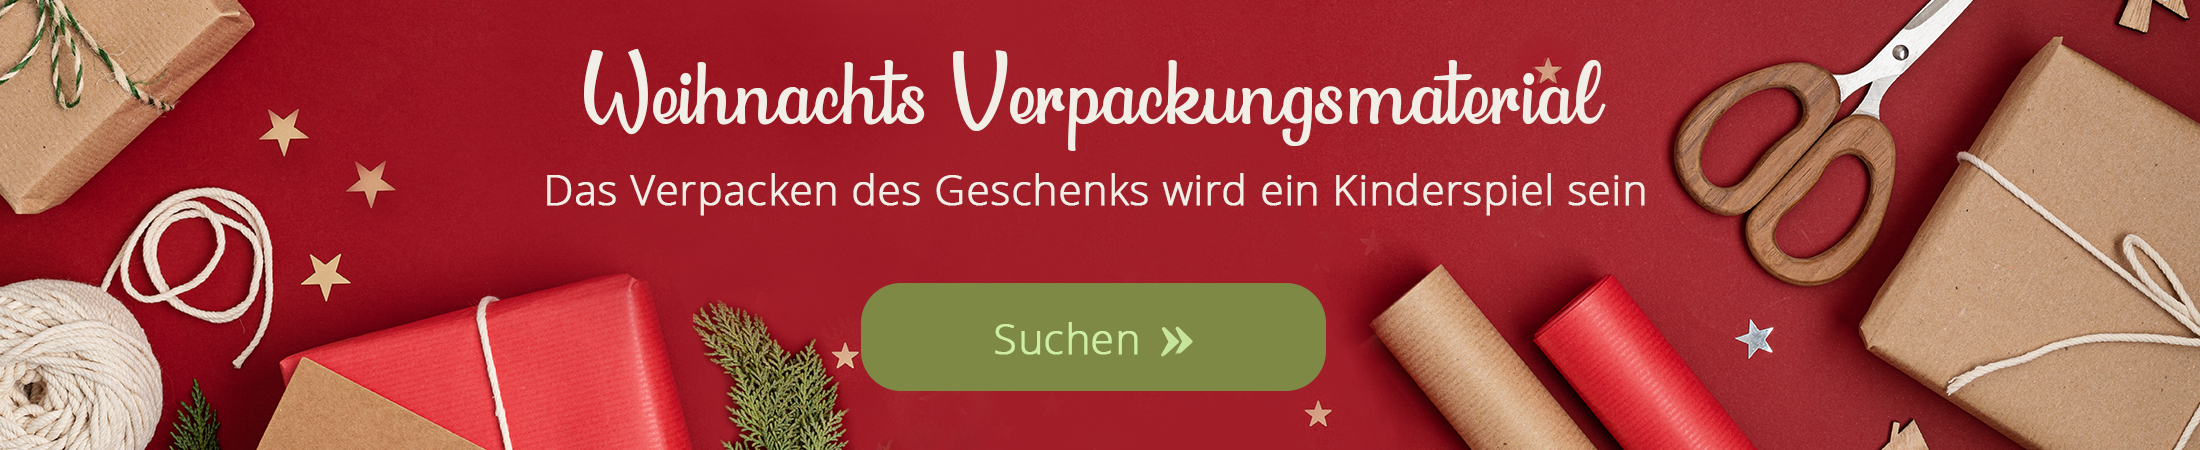 Weihnachtsverpackungsmaterial